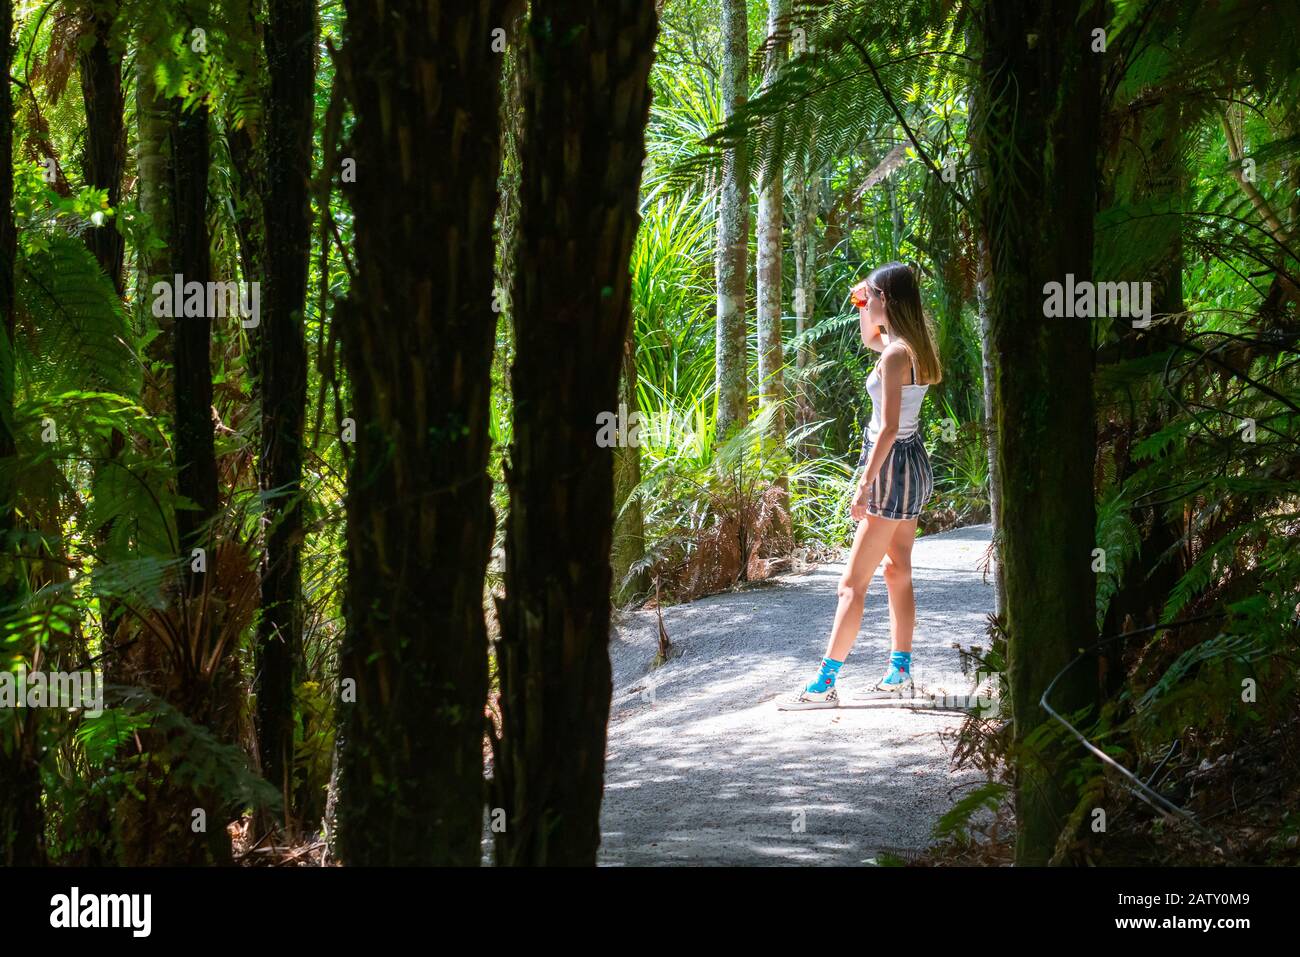 Attractive teenage girl on path of bush walk highlighted between silhouettes of trees and ferns in McLaren Falls Park, Tauranga New Zealand. Stock Photo